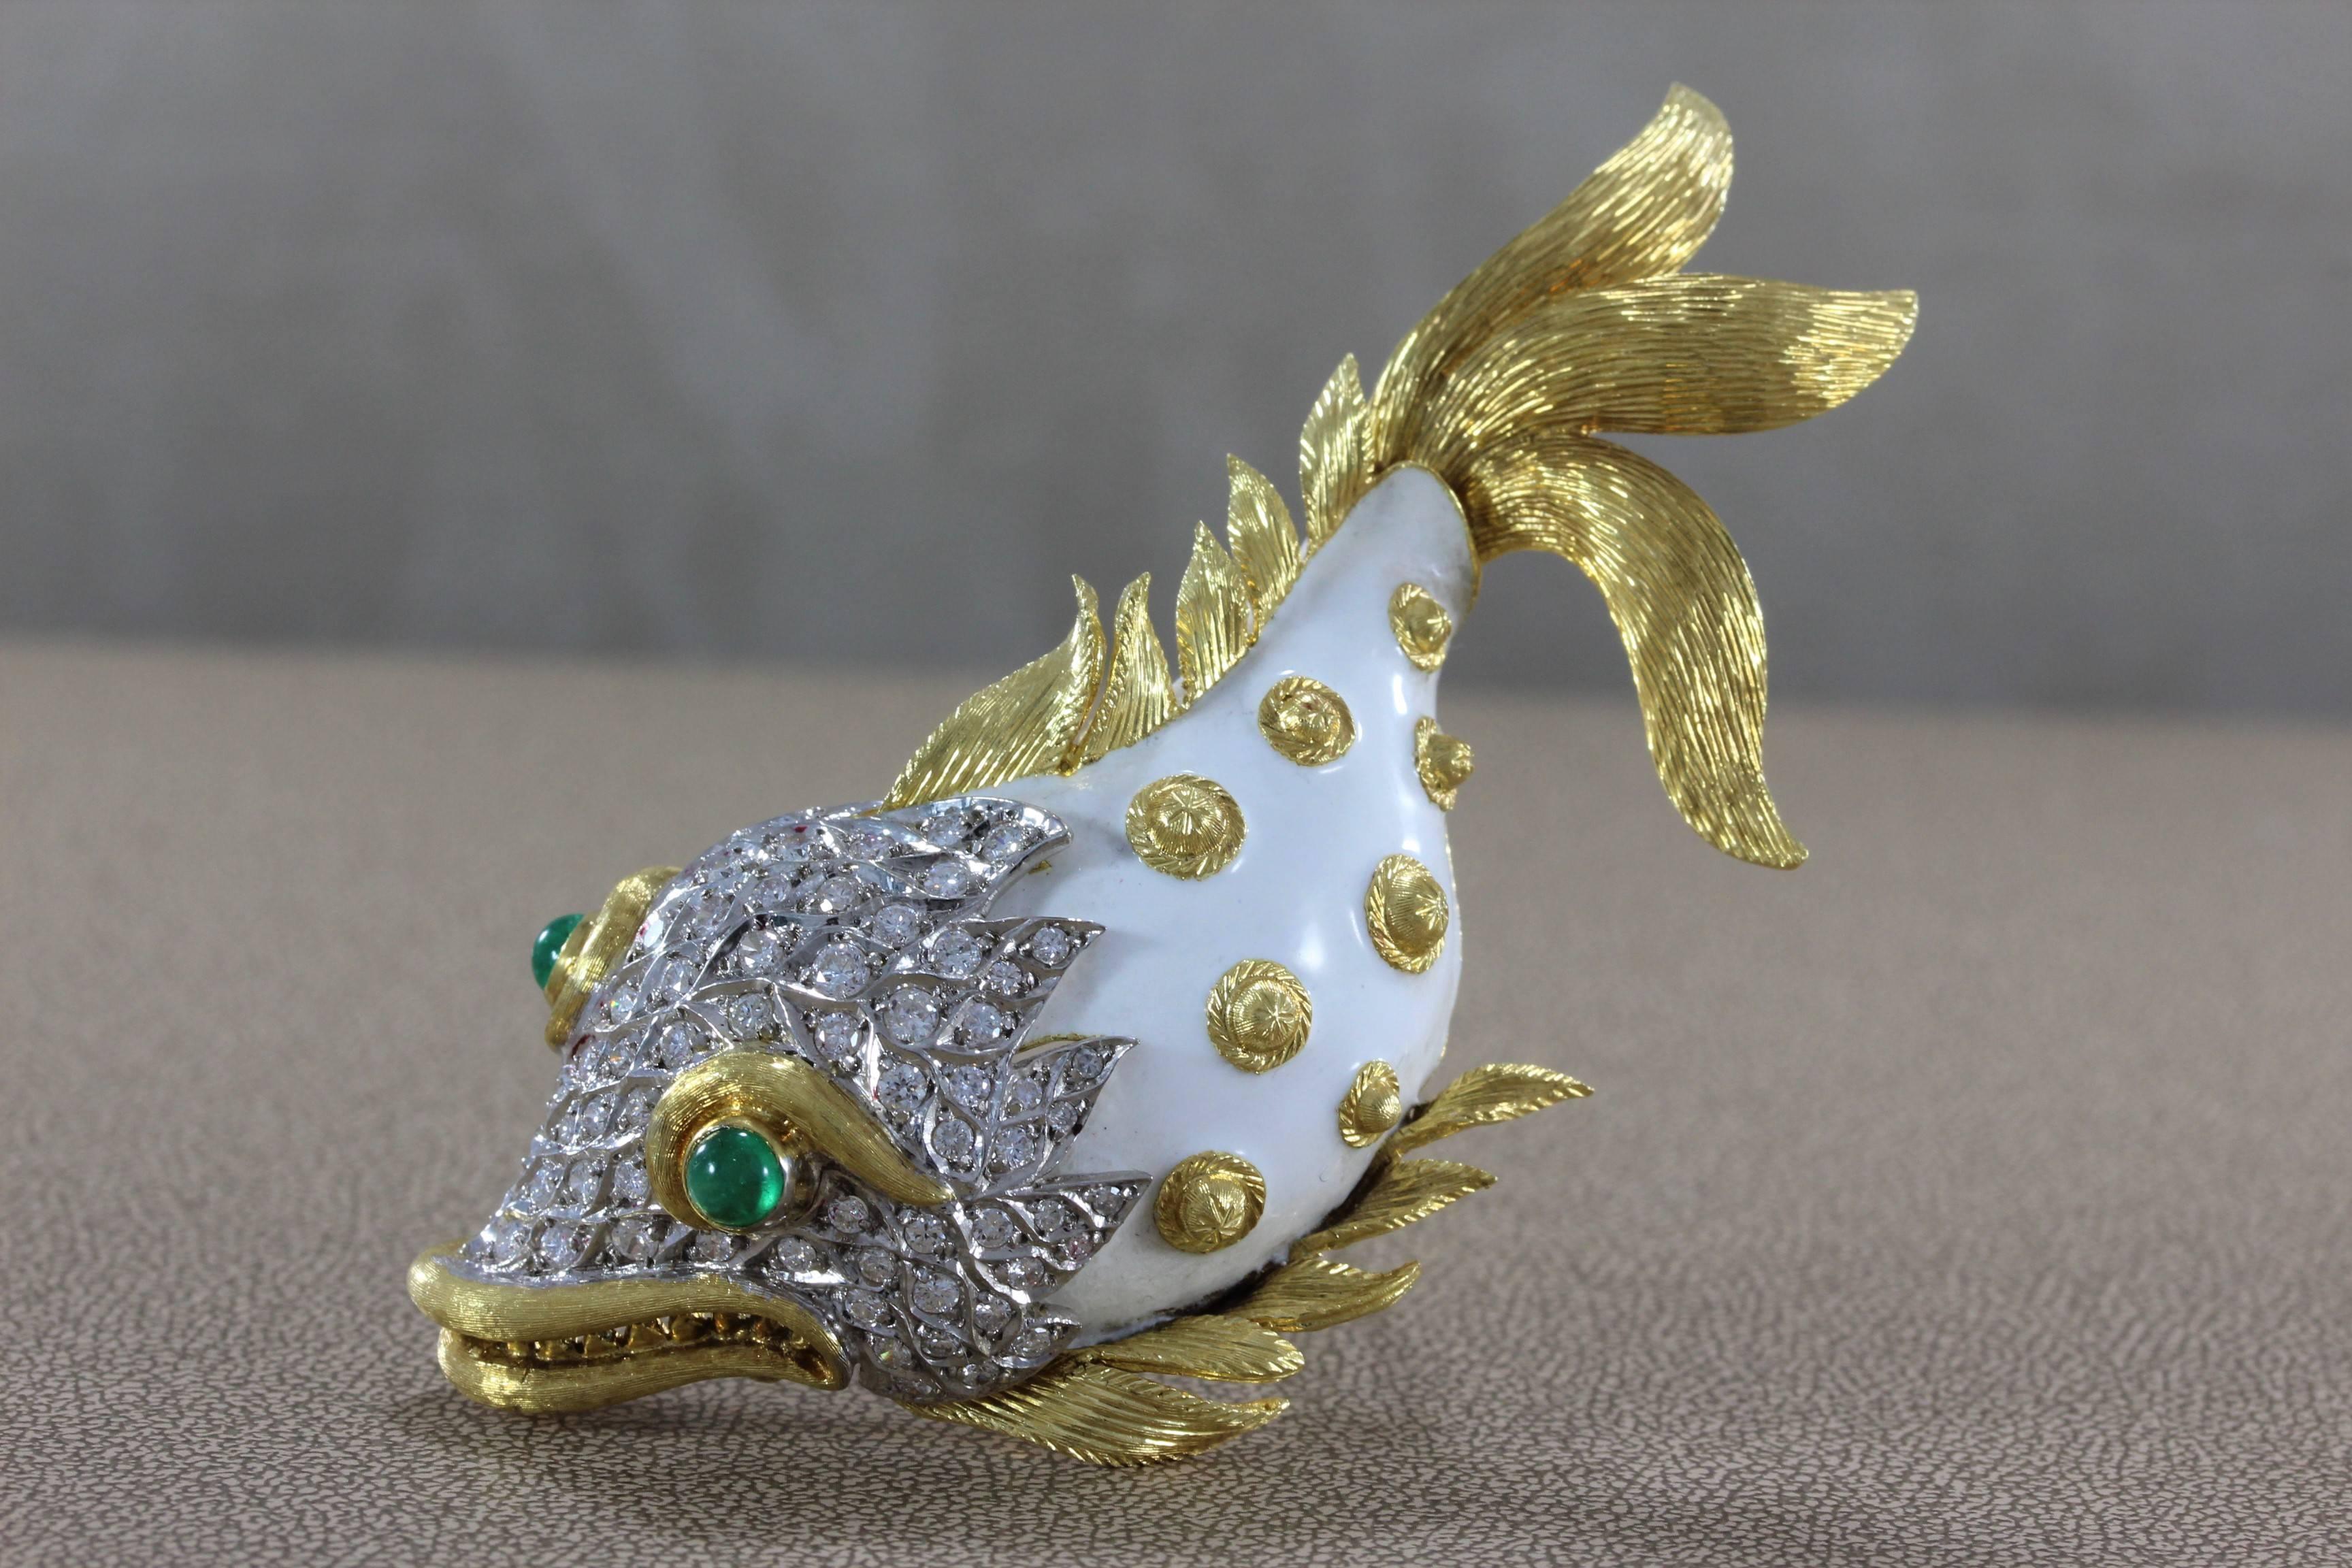 A lovely fish studded with 3.23 carats of diamonds set in 18K gold. Smooth white enamel is used on the fish's body with gold accents making it unique. Two emerald cabochons act as its mesmerizing eyes. 

Dimensions: 3.5 x 1.5 inches